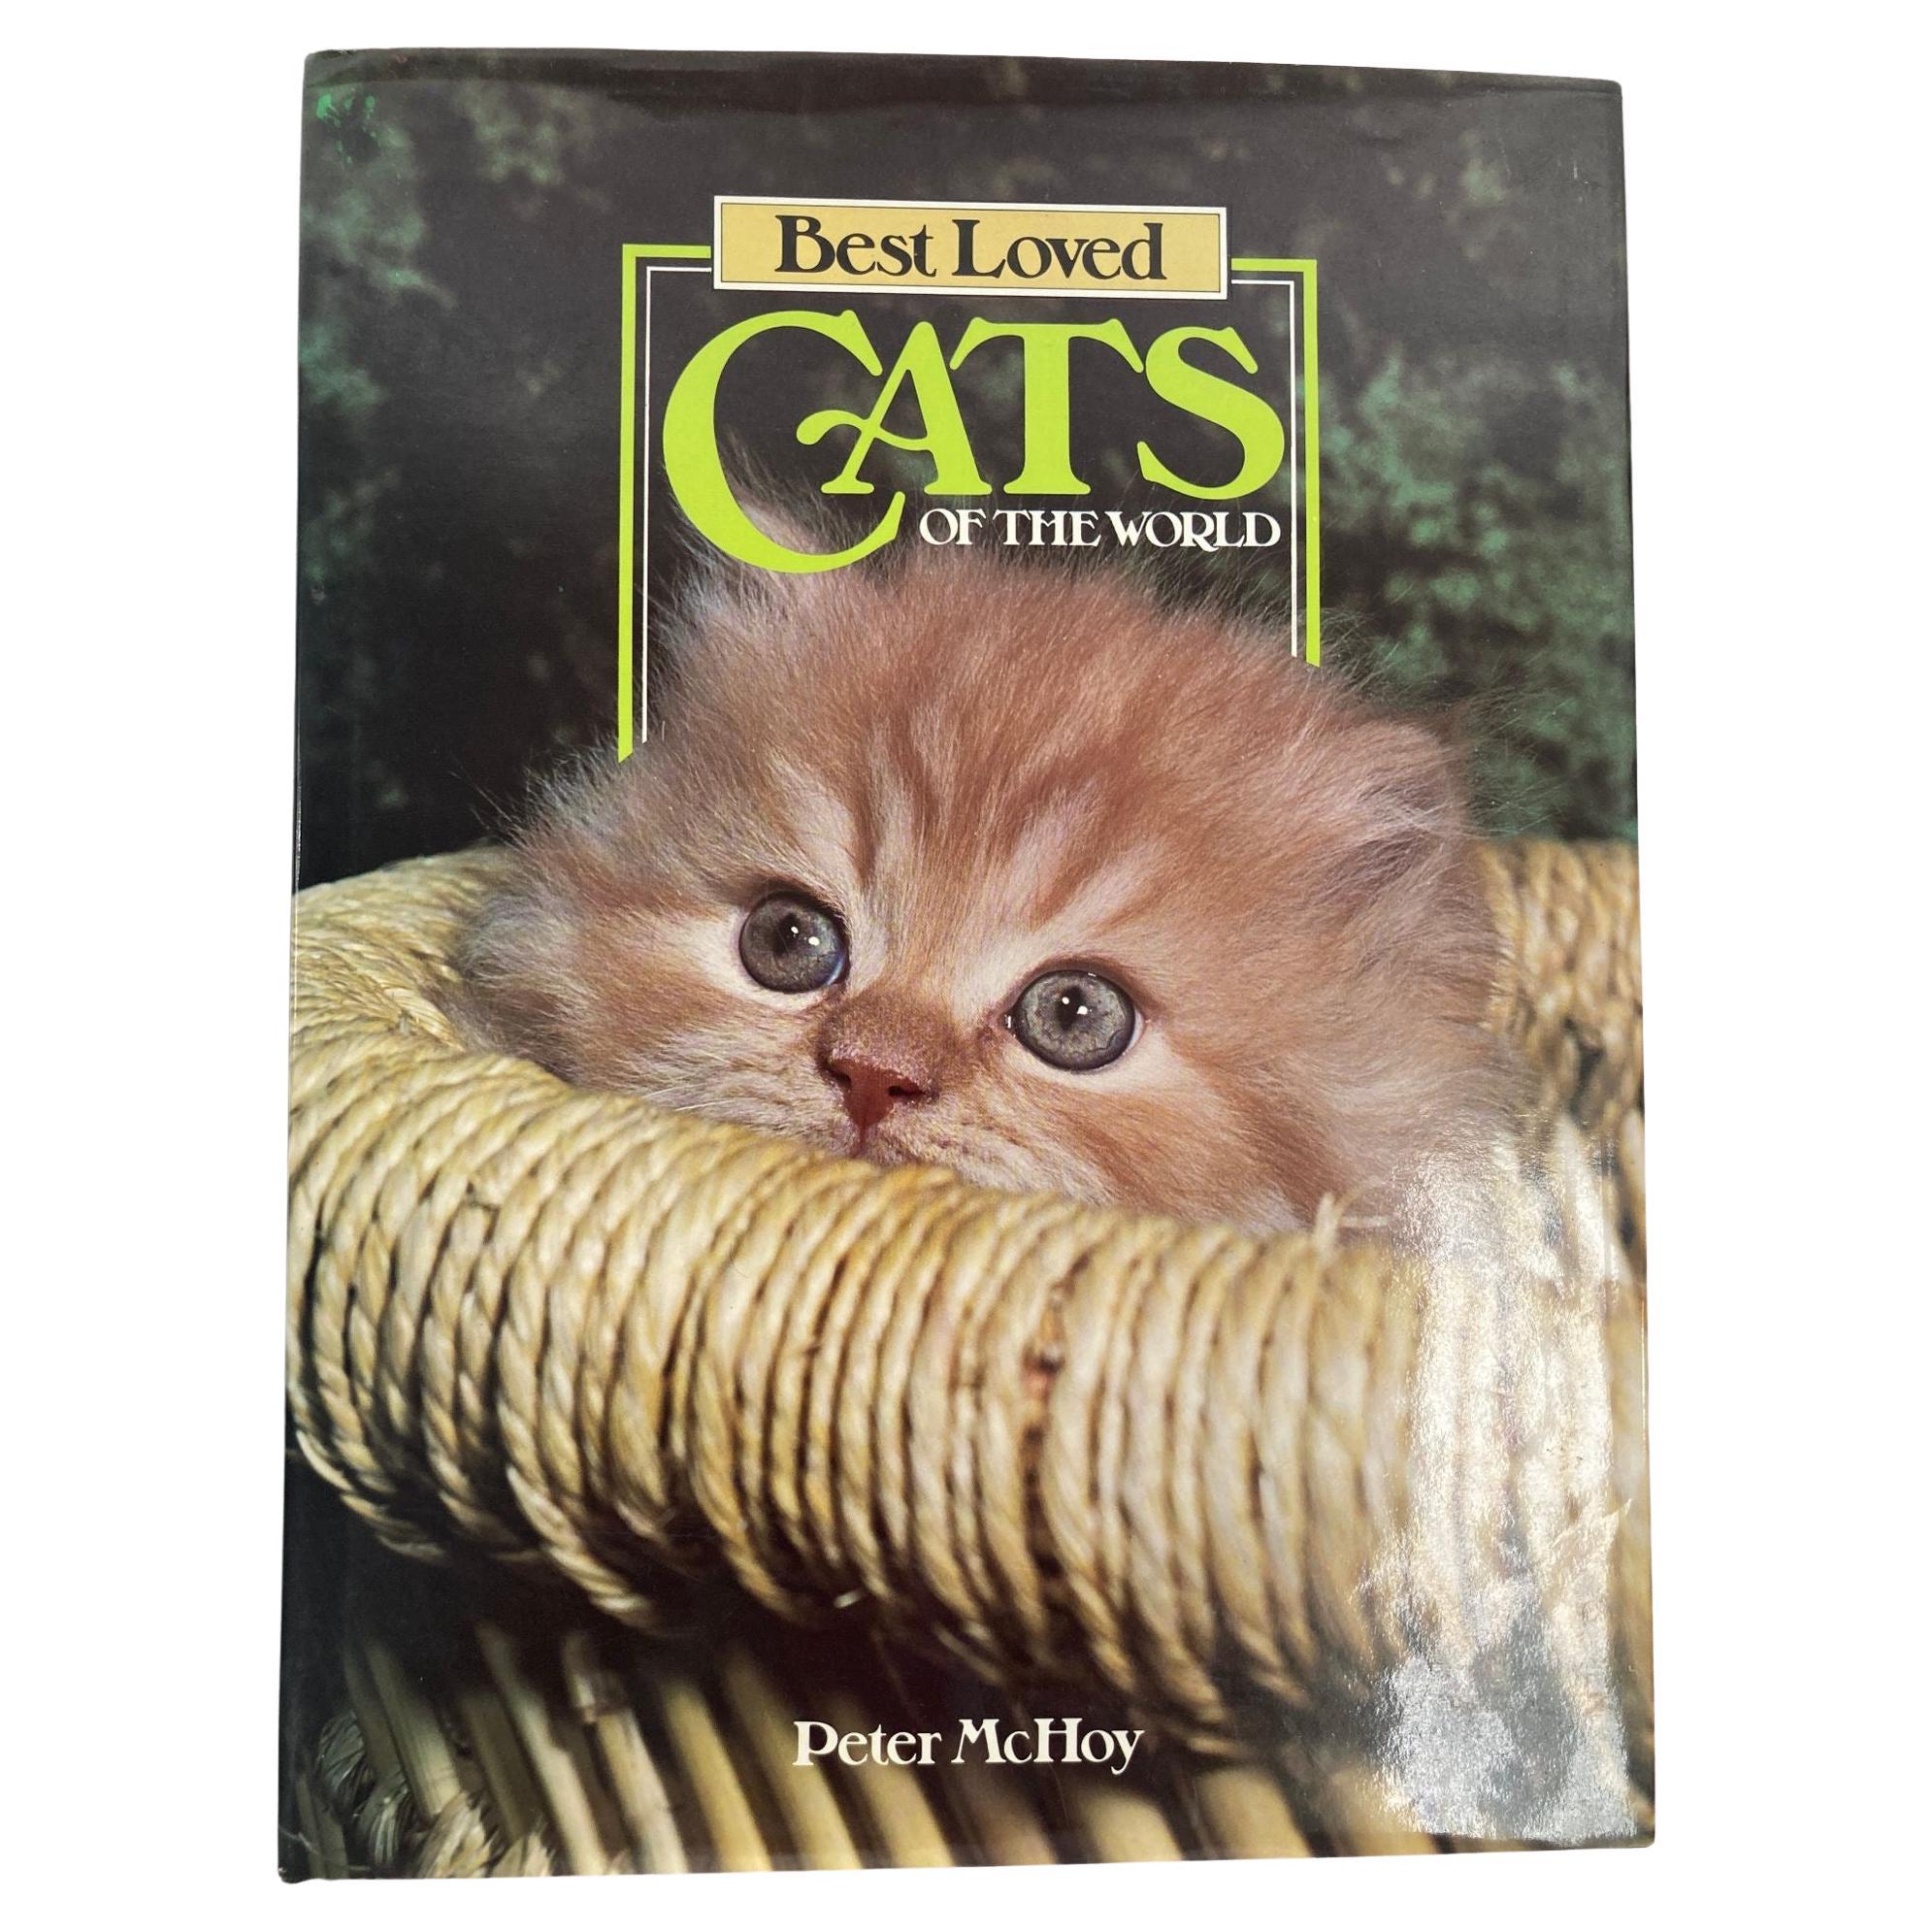 Best Loved Cats of the World Hardcover Book by Peter McHoy